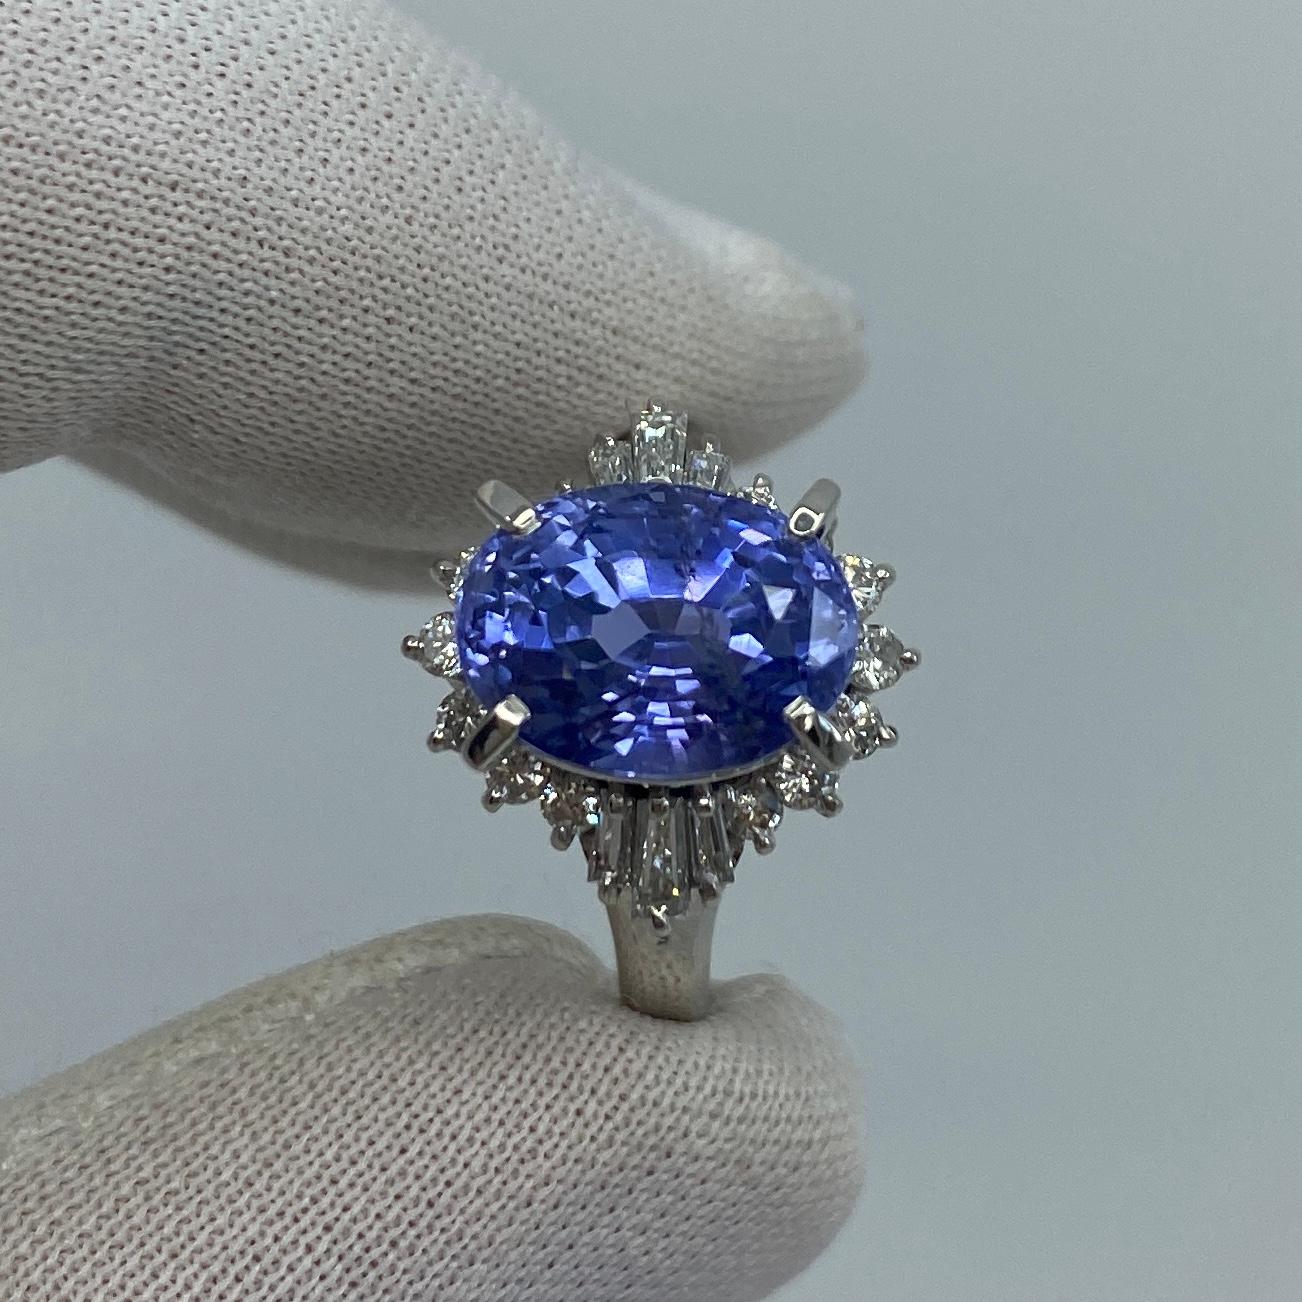 Women's GIA Certified 7.08 Carat Untreated Color Change Sapphire & Diamond Cocktail Ring For Sale